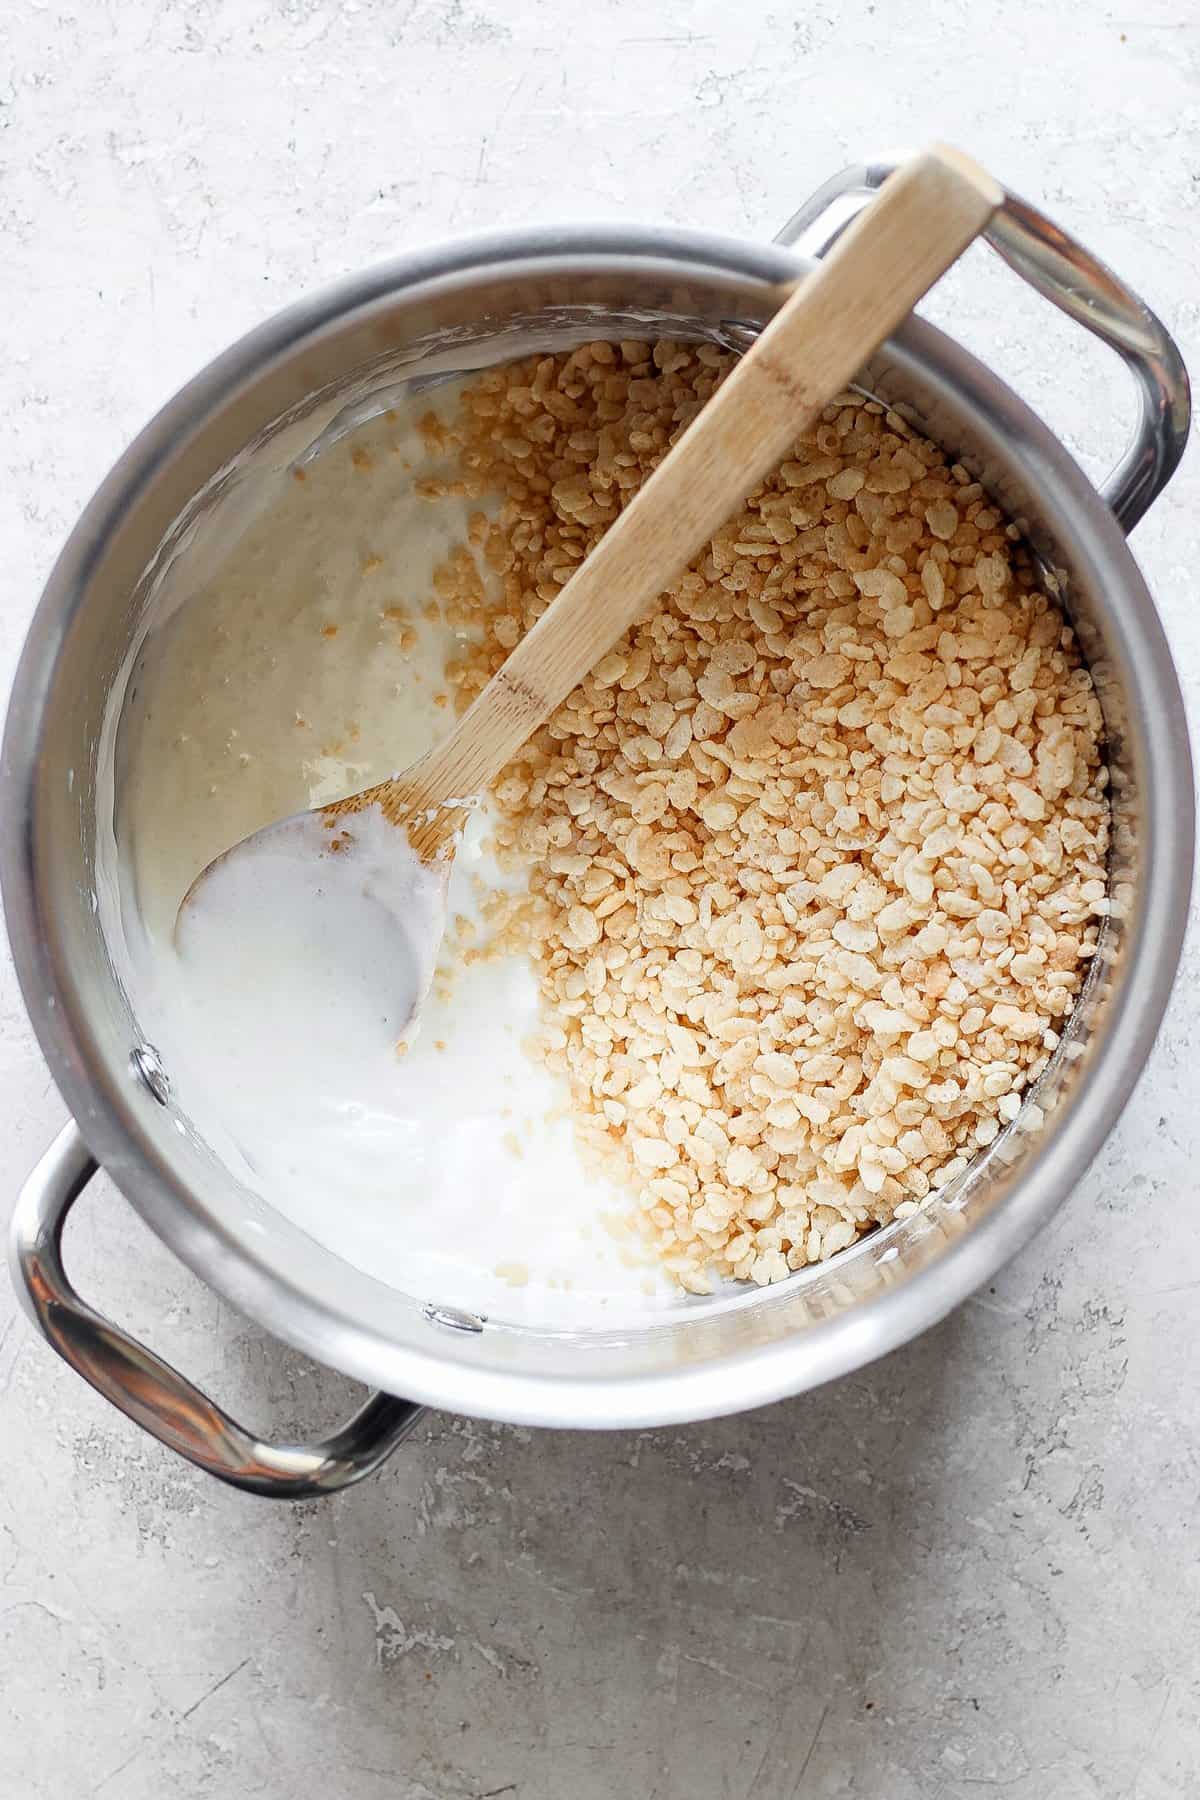 A pot filled with melted marshmallows and some toasted Rice Krispie treats, with a wooden spoon resting inside, on a light-colored surface.